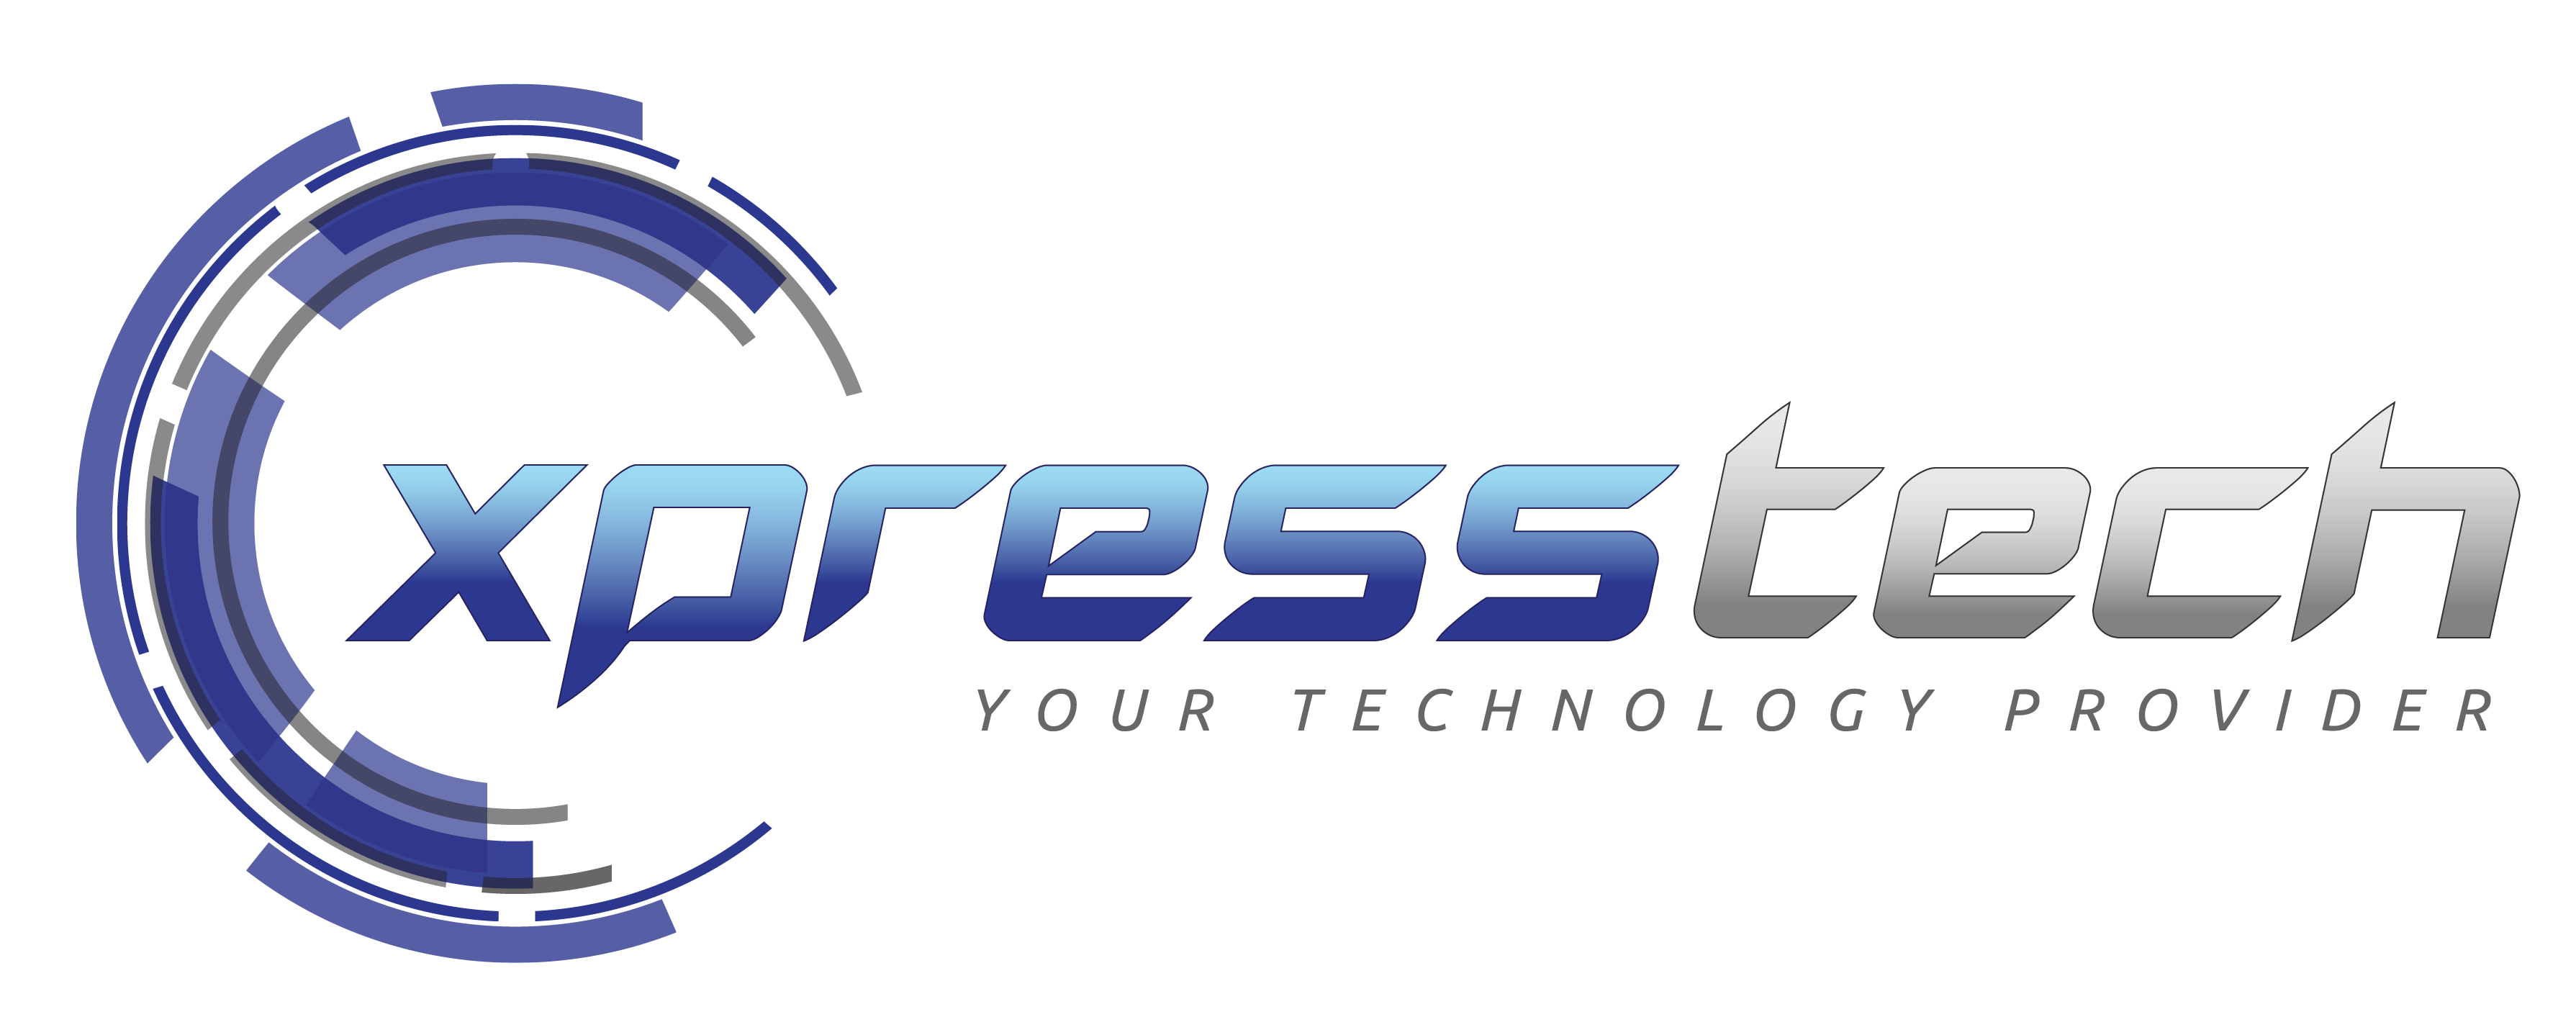 XpressTech :: Support Ticket System